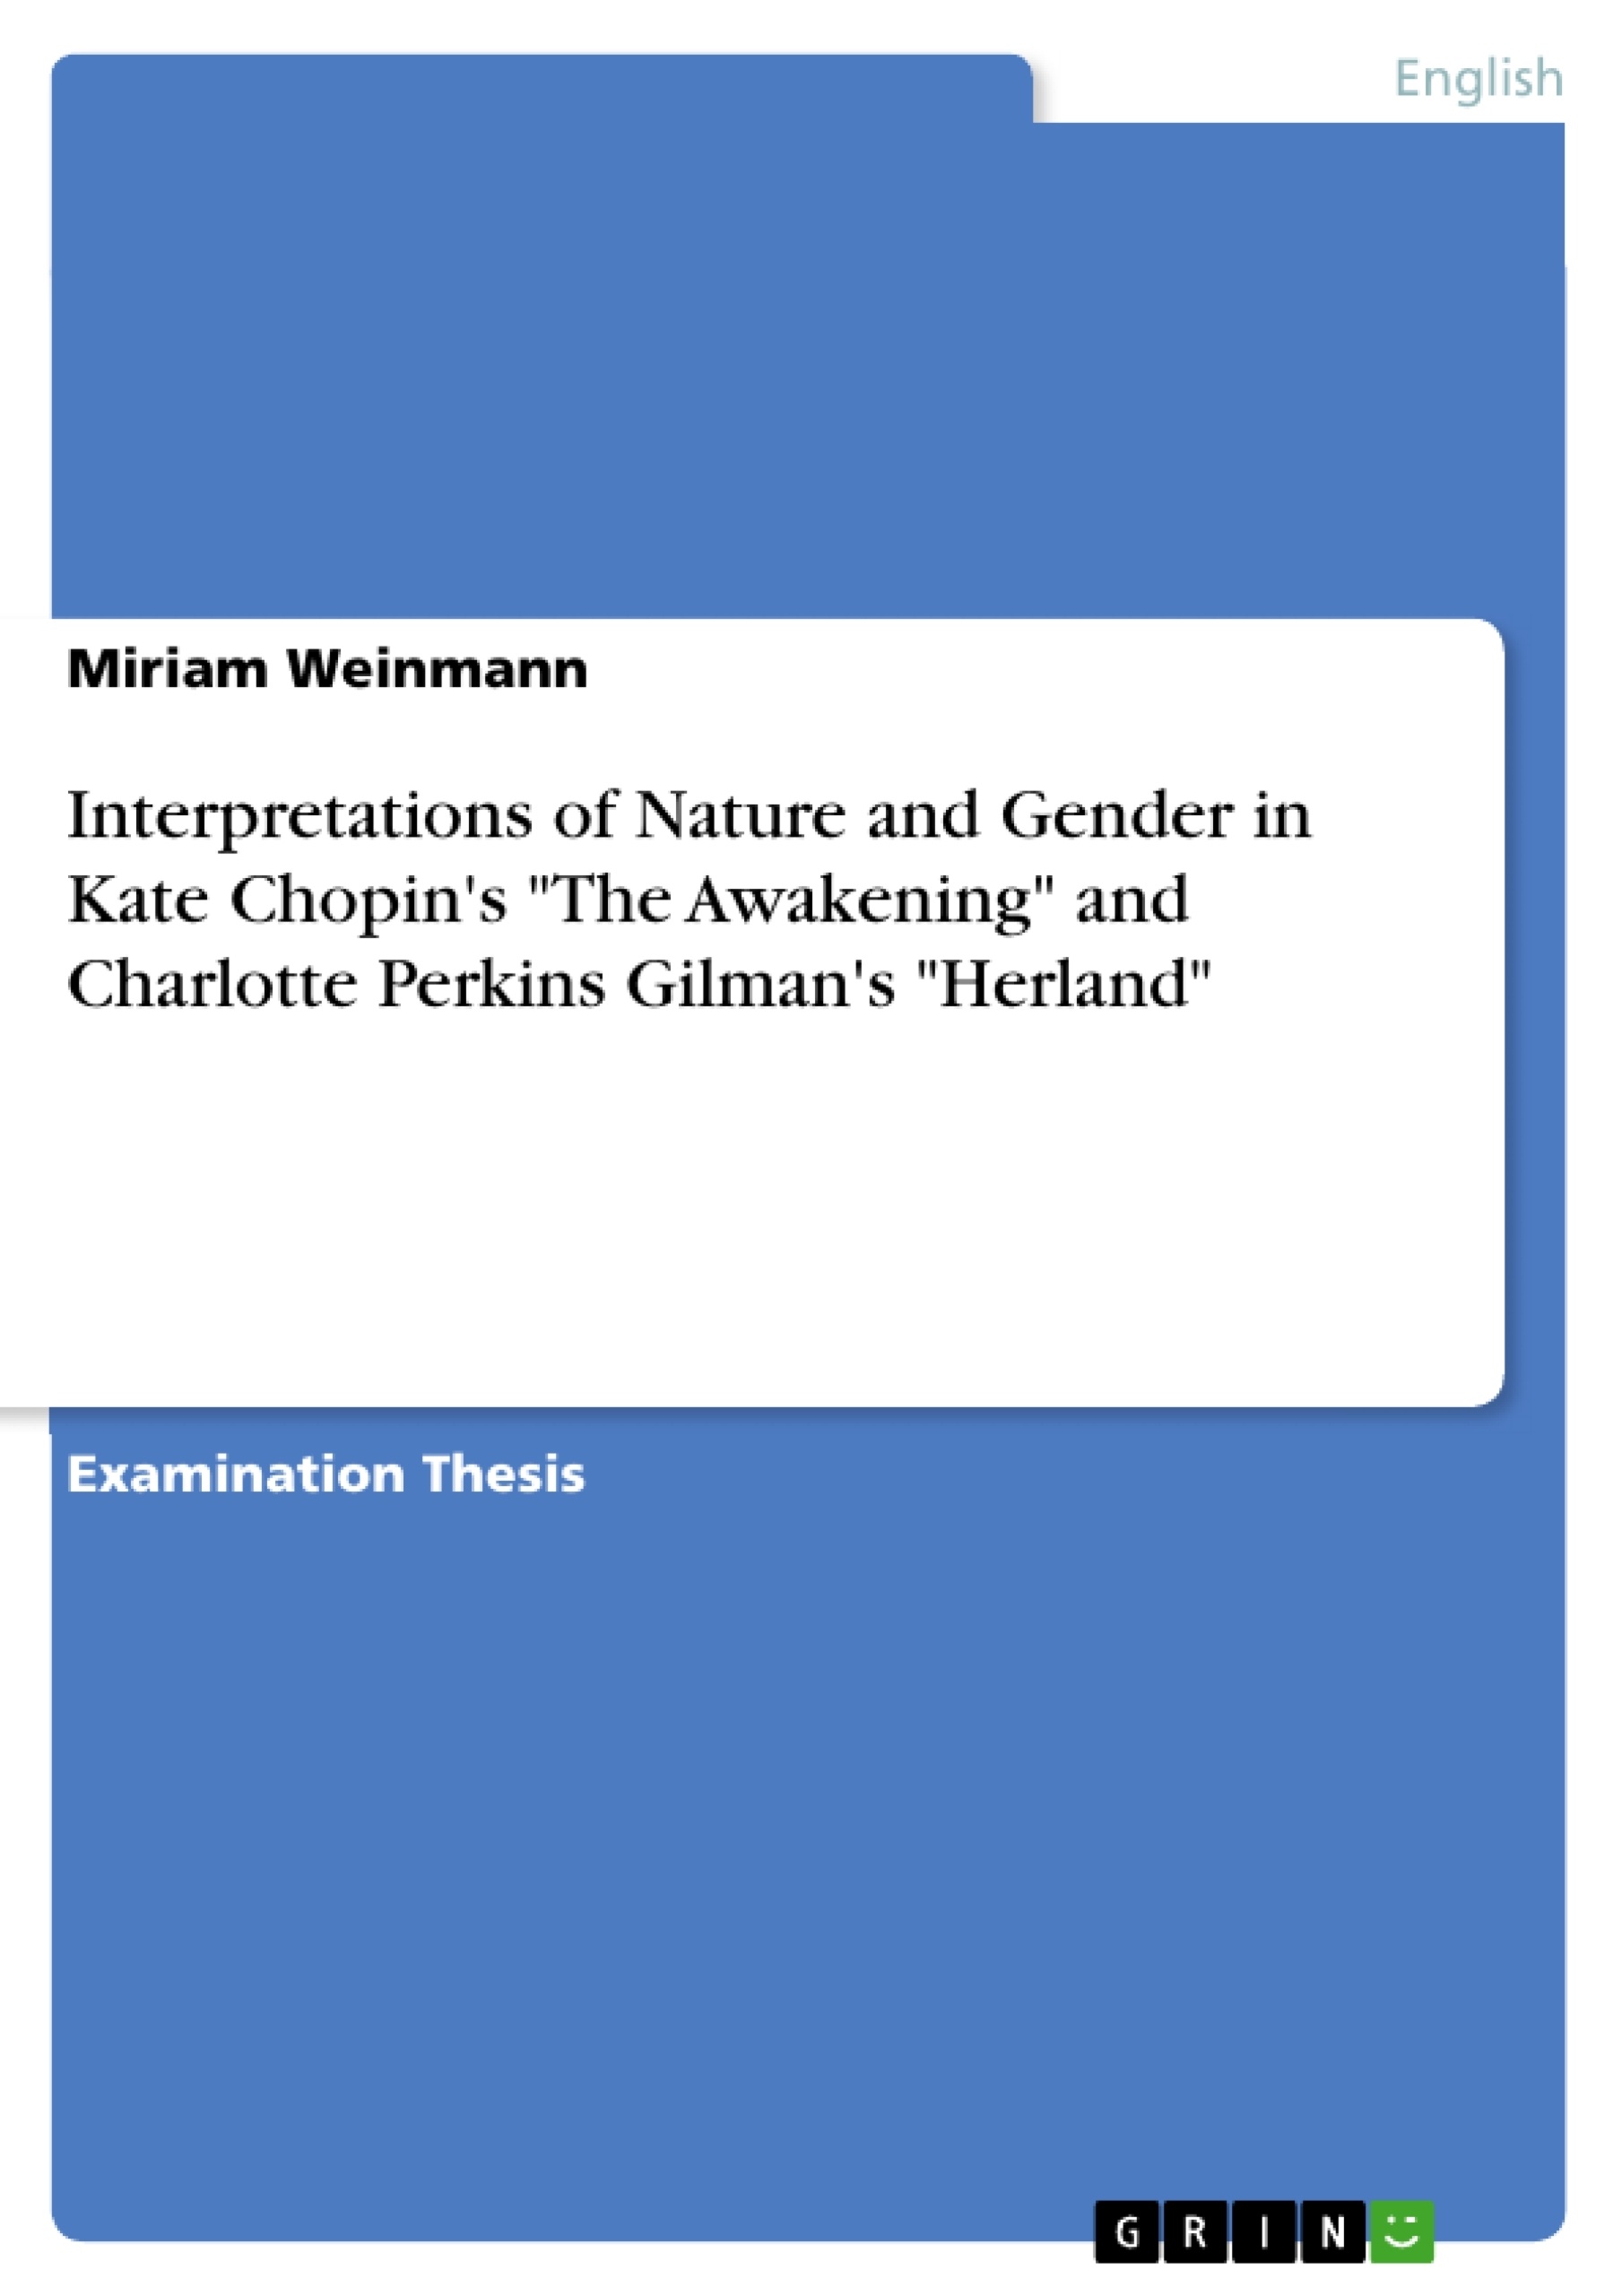 Titre: Interpretations of Nature and Gender in Kate Chopin's "The Awakening" and Charlotte Perkins Gilman's "Herland"